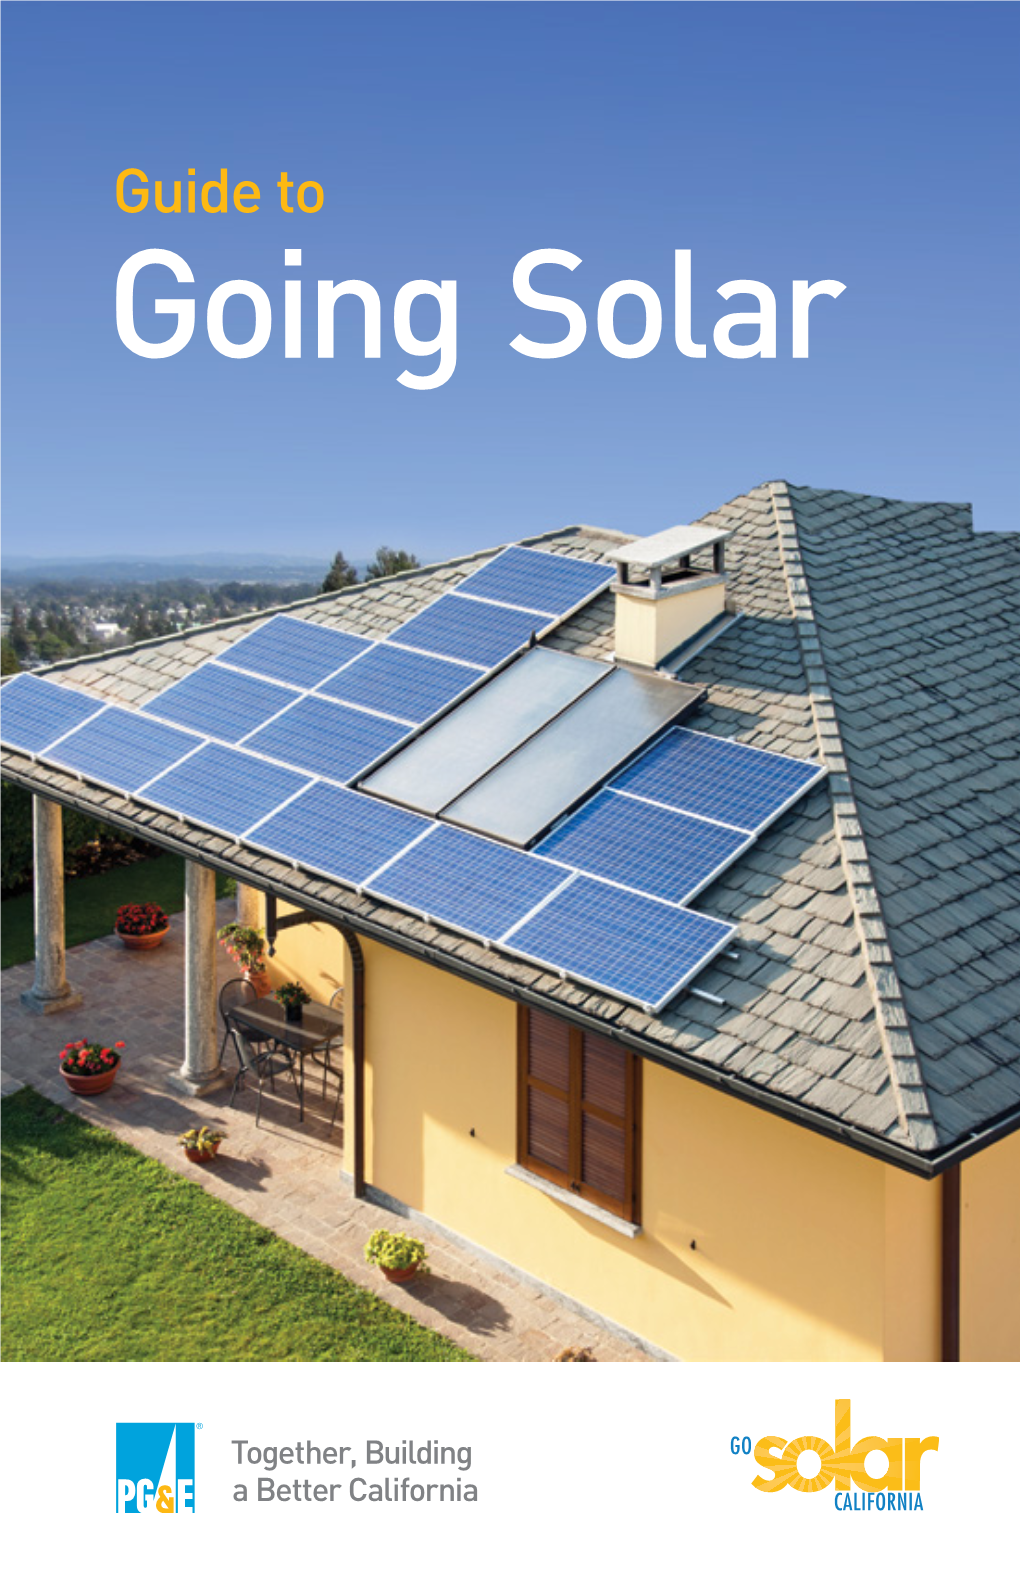 Guide to Going Solar Now Featuring Solar Water Heating